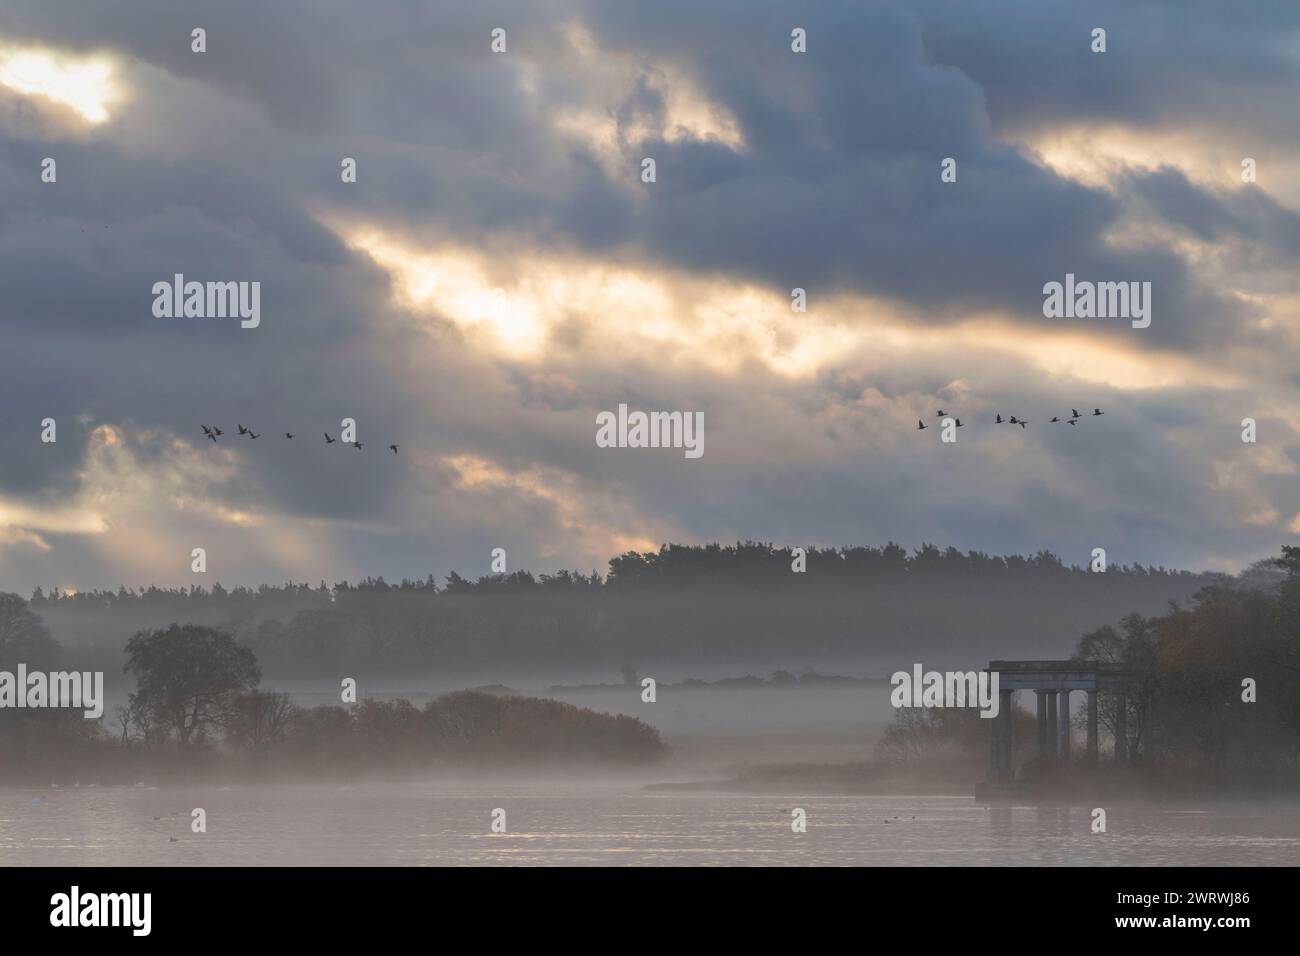 The Loch of Skene at Daybreak on a Misty Autumn Morning, Looking Towards the Temple (Folly) with Small Flocks of Pink-Footed Geese in Flight Stock Photo